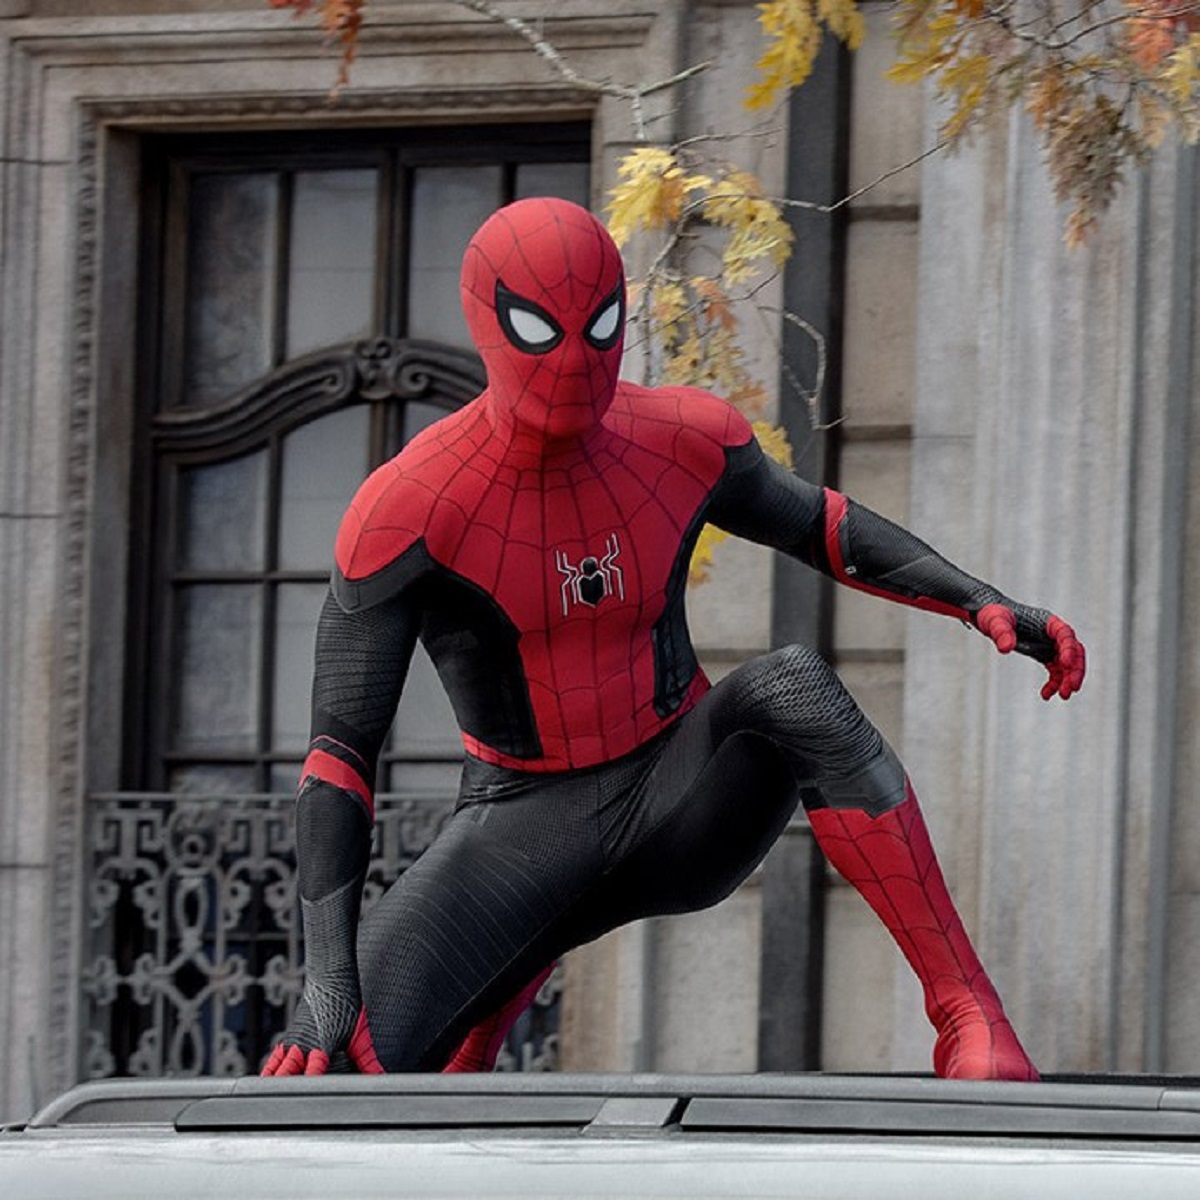 Top Hollywood Grossers in India; Spider-man: No Way Home leaps to No. 3 ...